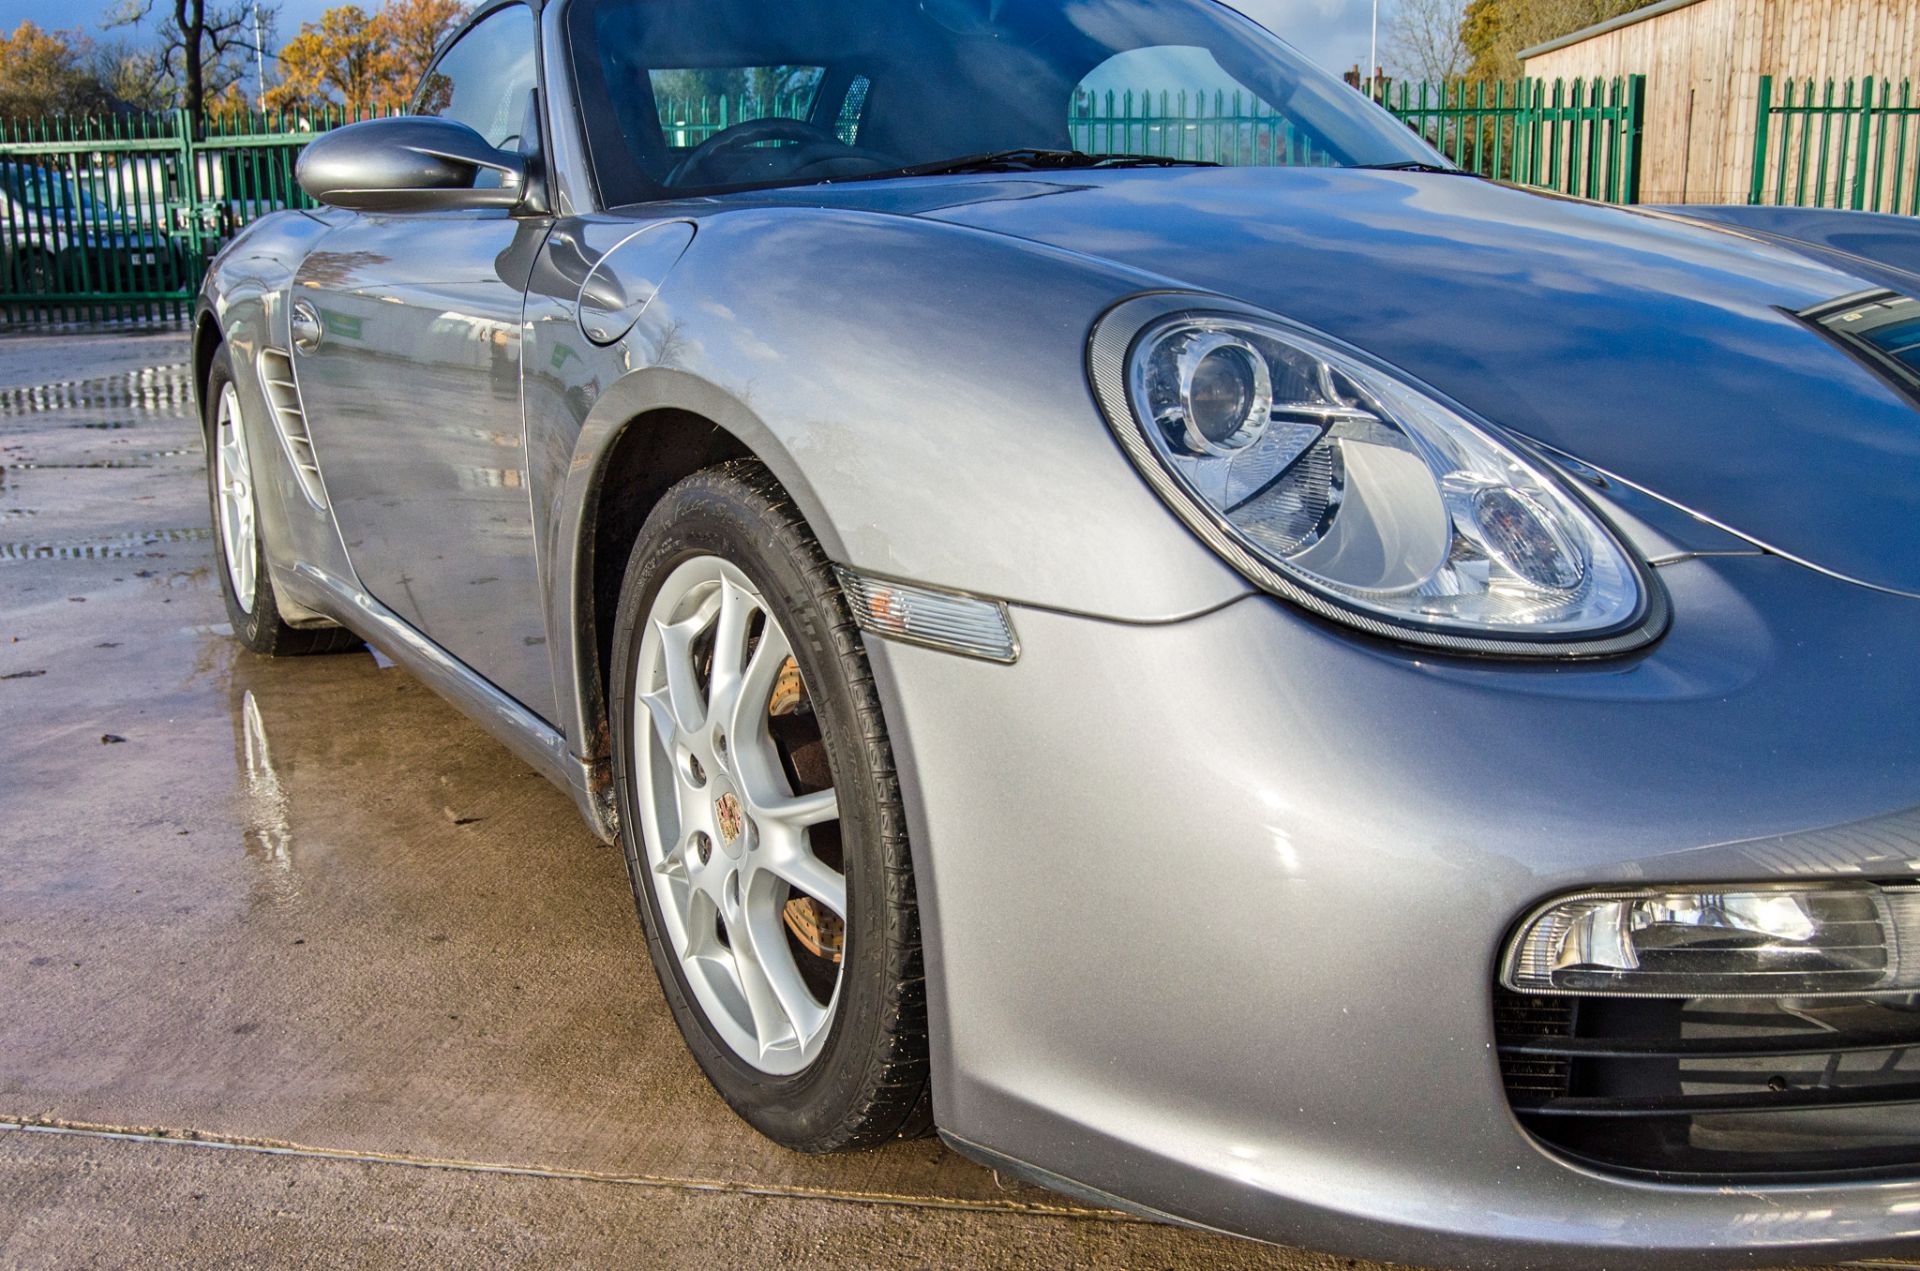 Porsche Boxster 2.7 litre 5 speed manual convertible roadster Registration Number: RN05 KFK Date - Image 12 of 45